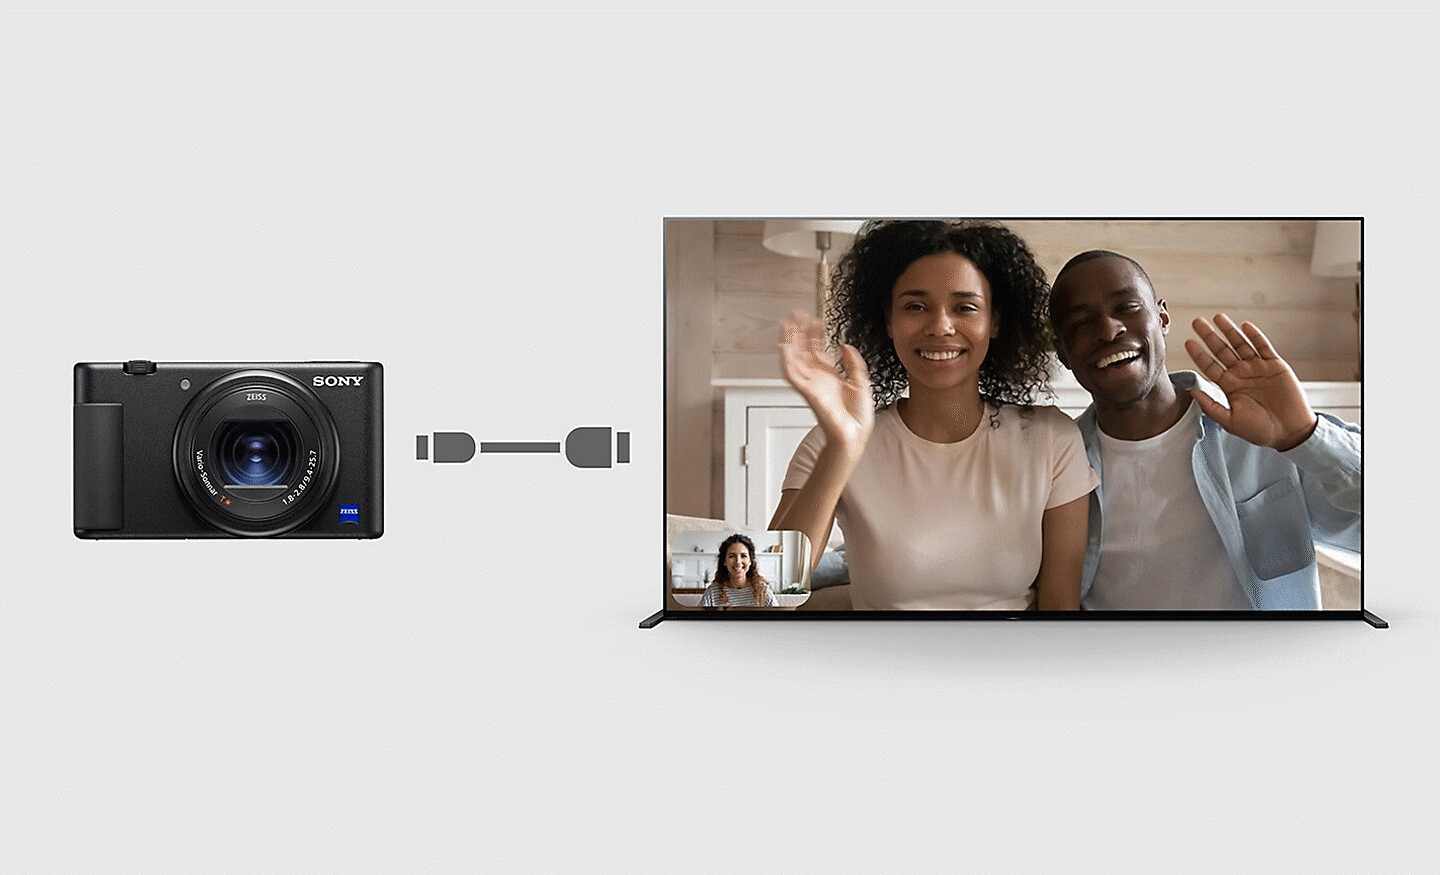 A image of video chat on the big screen of BRAVIA with connected camera